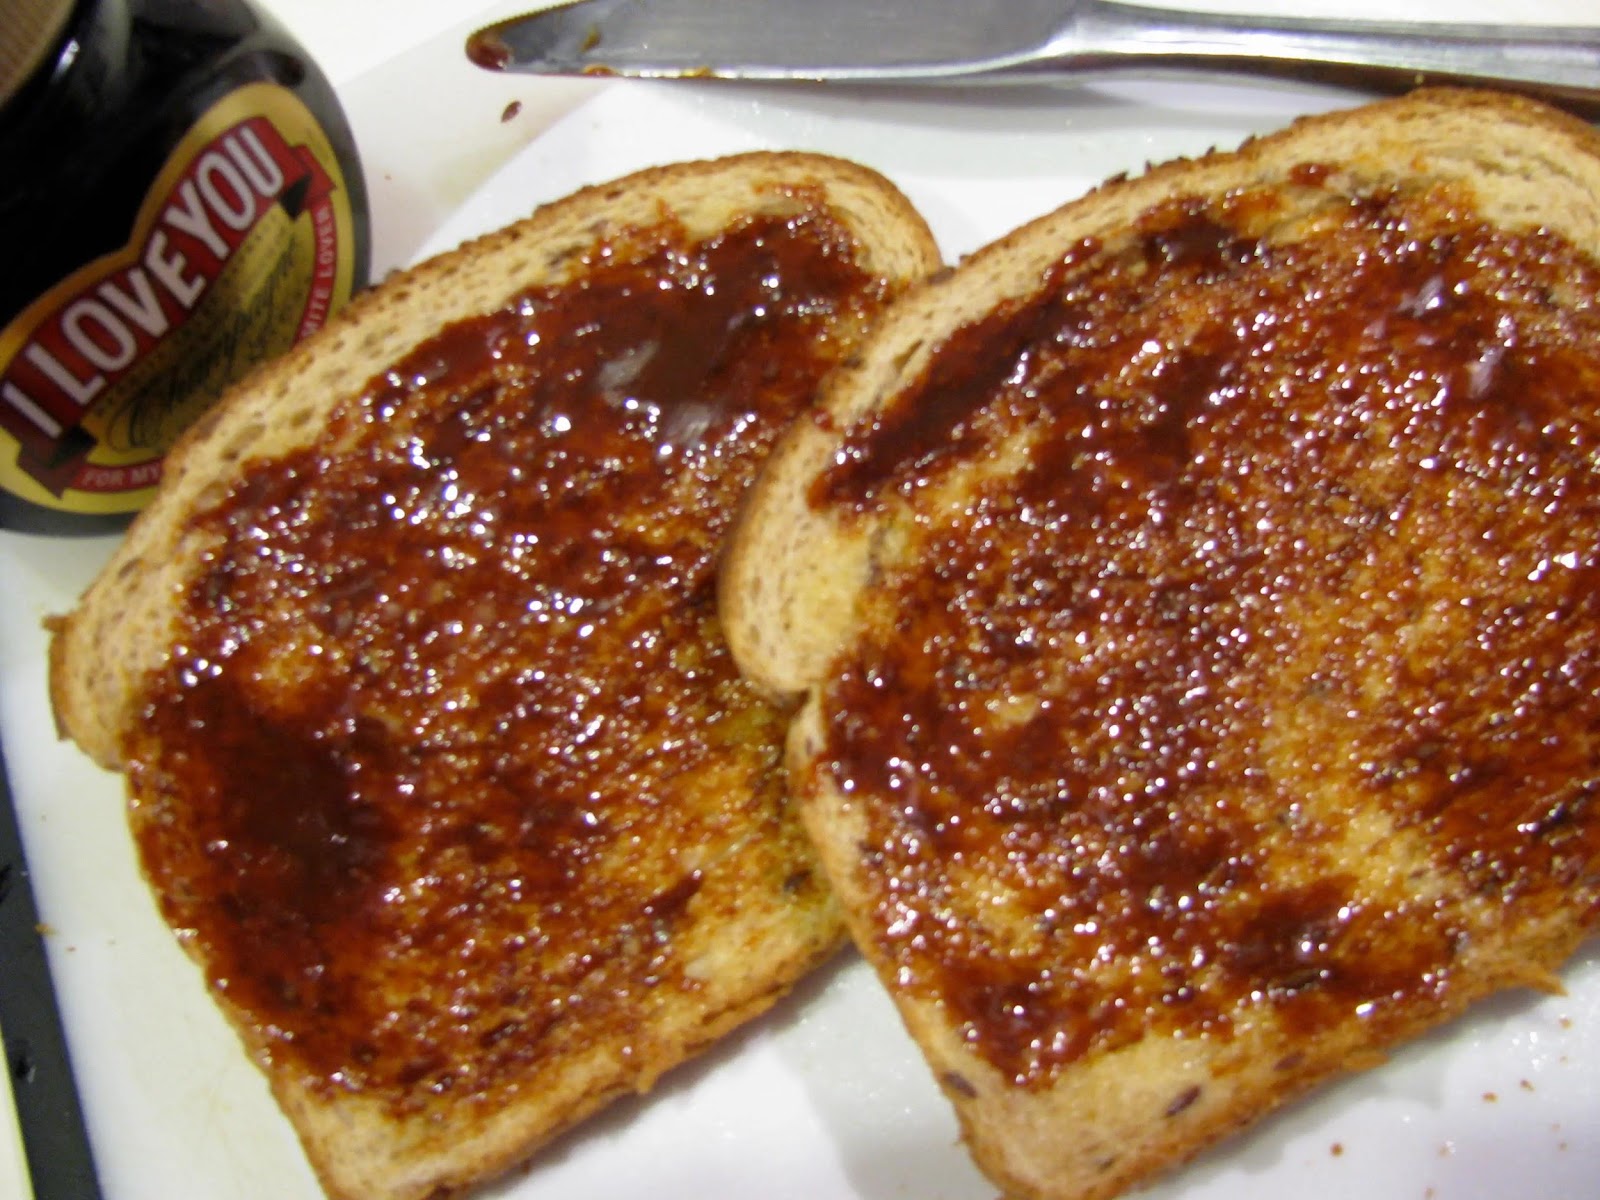 Buttered Toast with Marmite: A Beginner's Guide to Savoring This Unique Spread